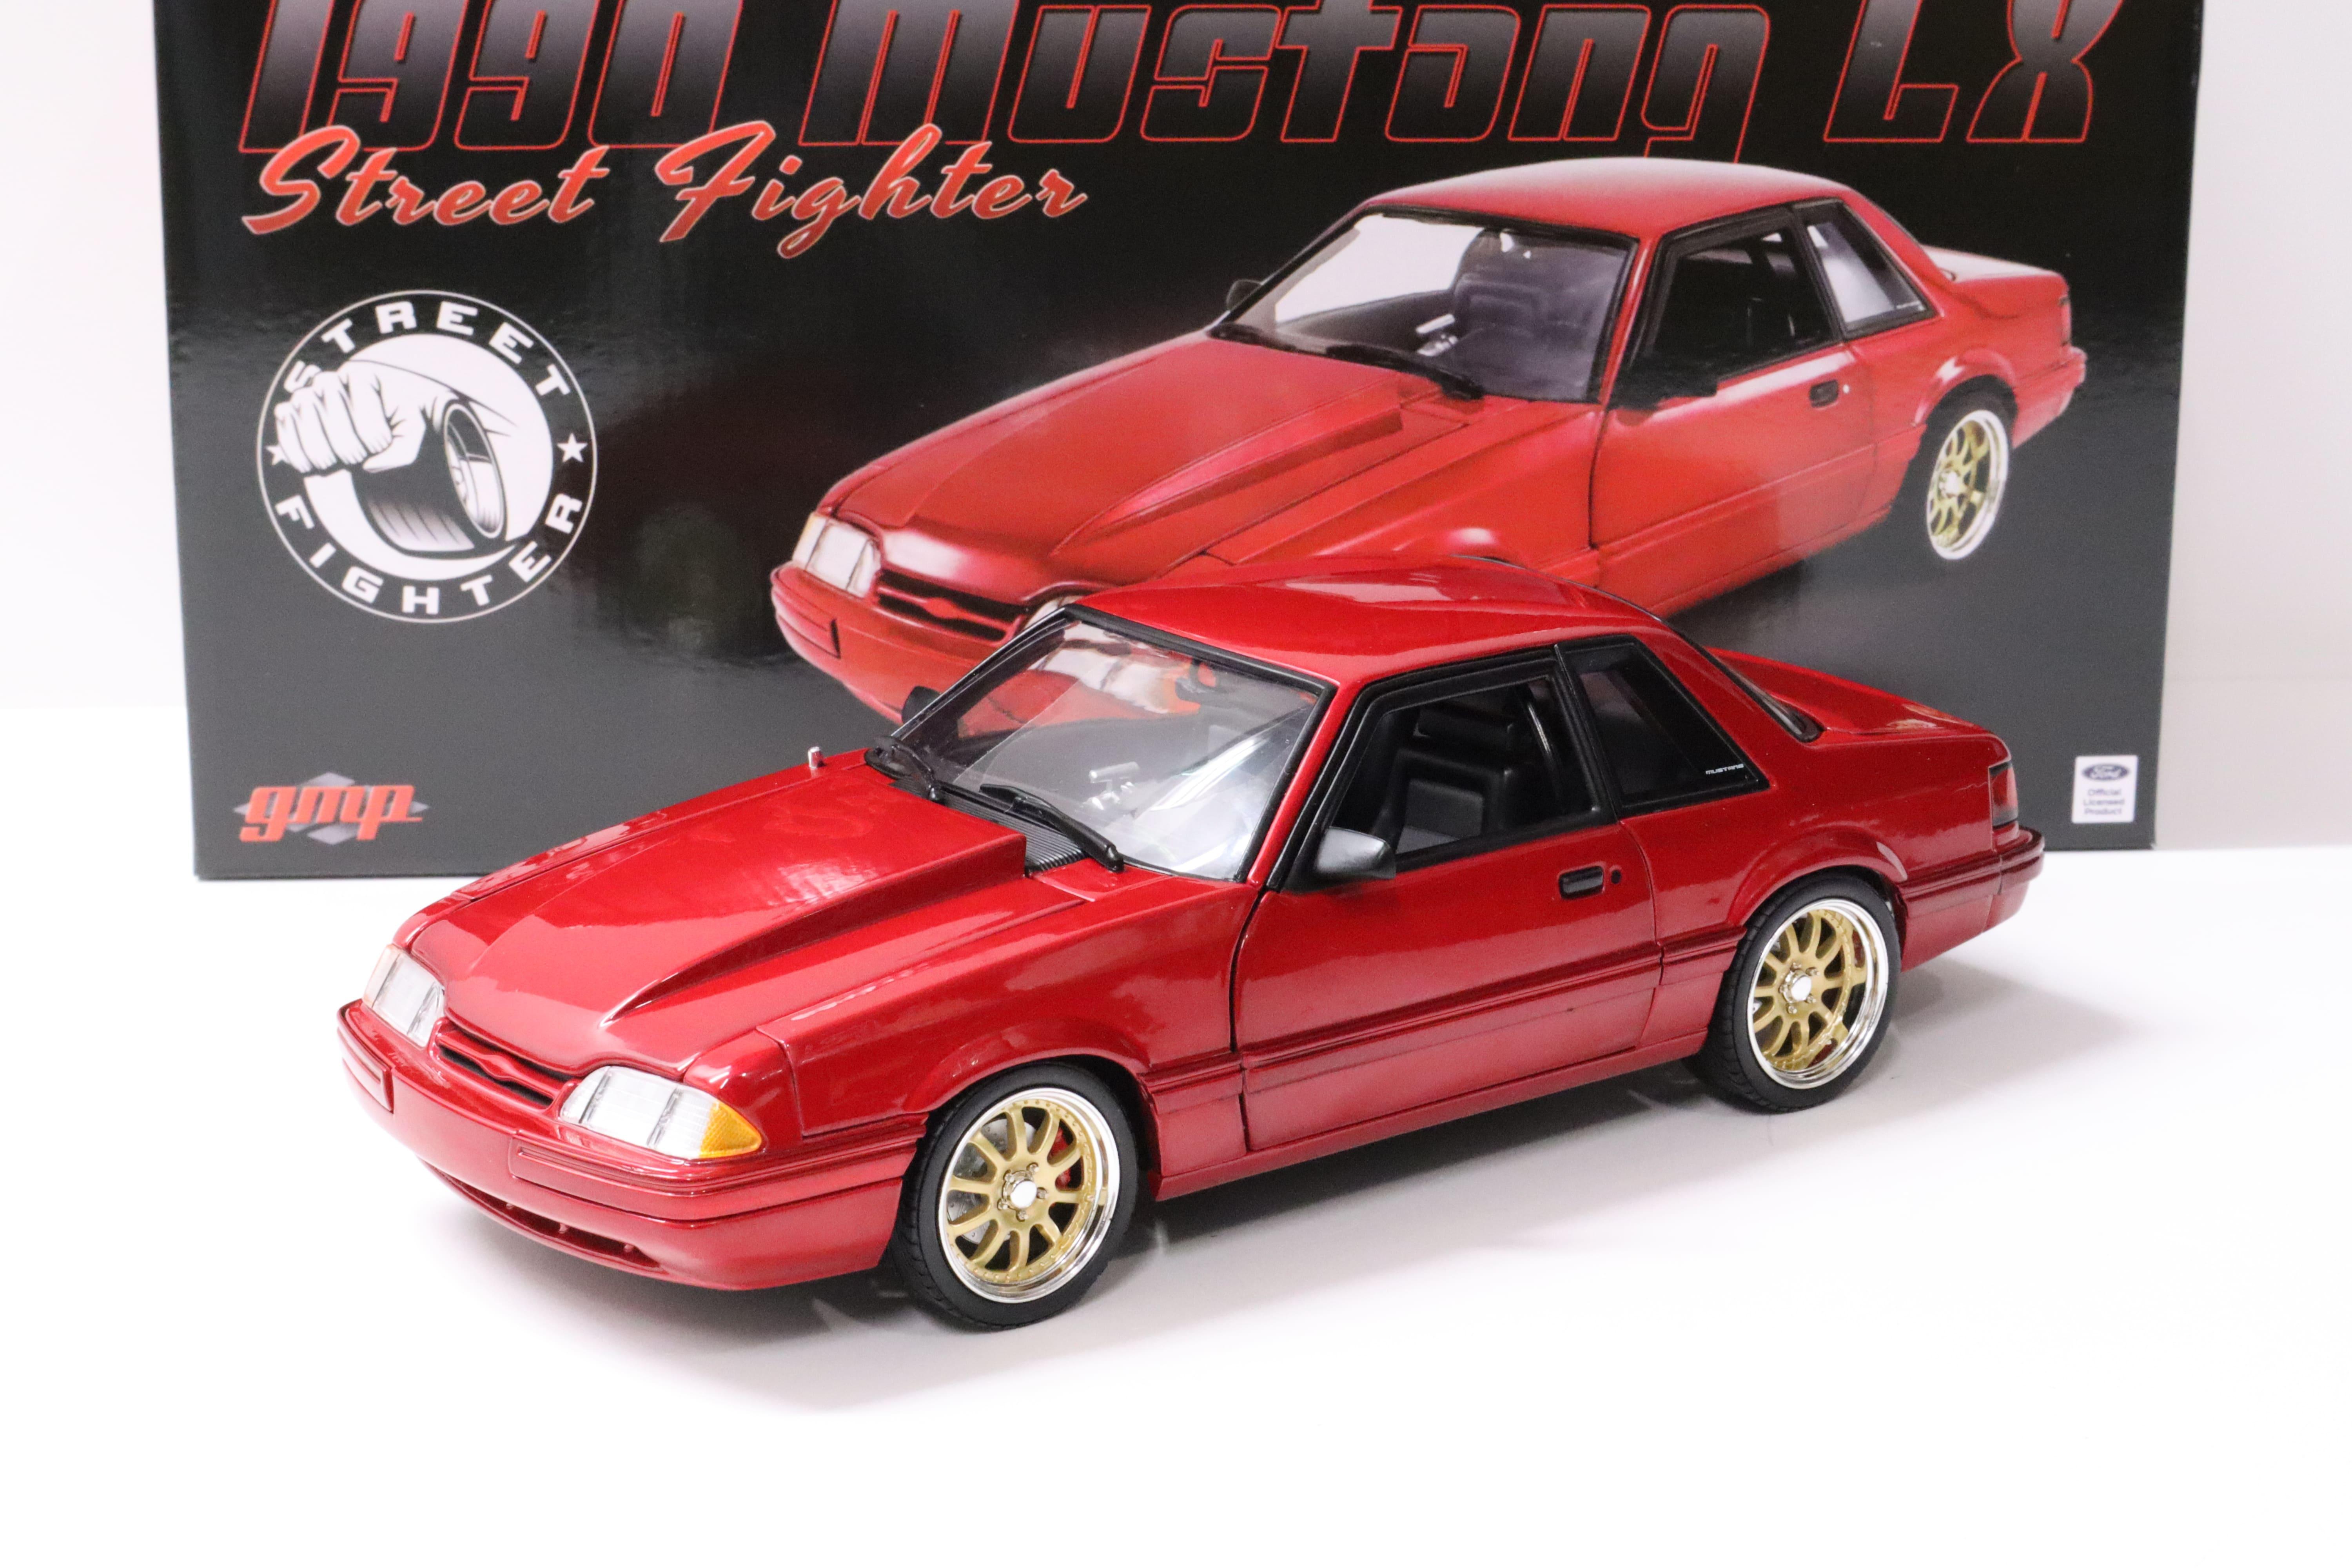 1:18 GMP 1990 Ford Mustang LX Coupe Street Fighter red metallic